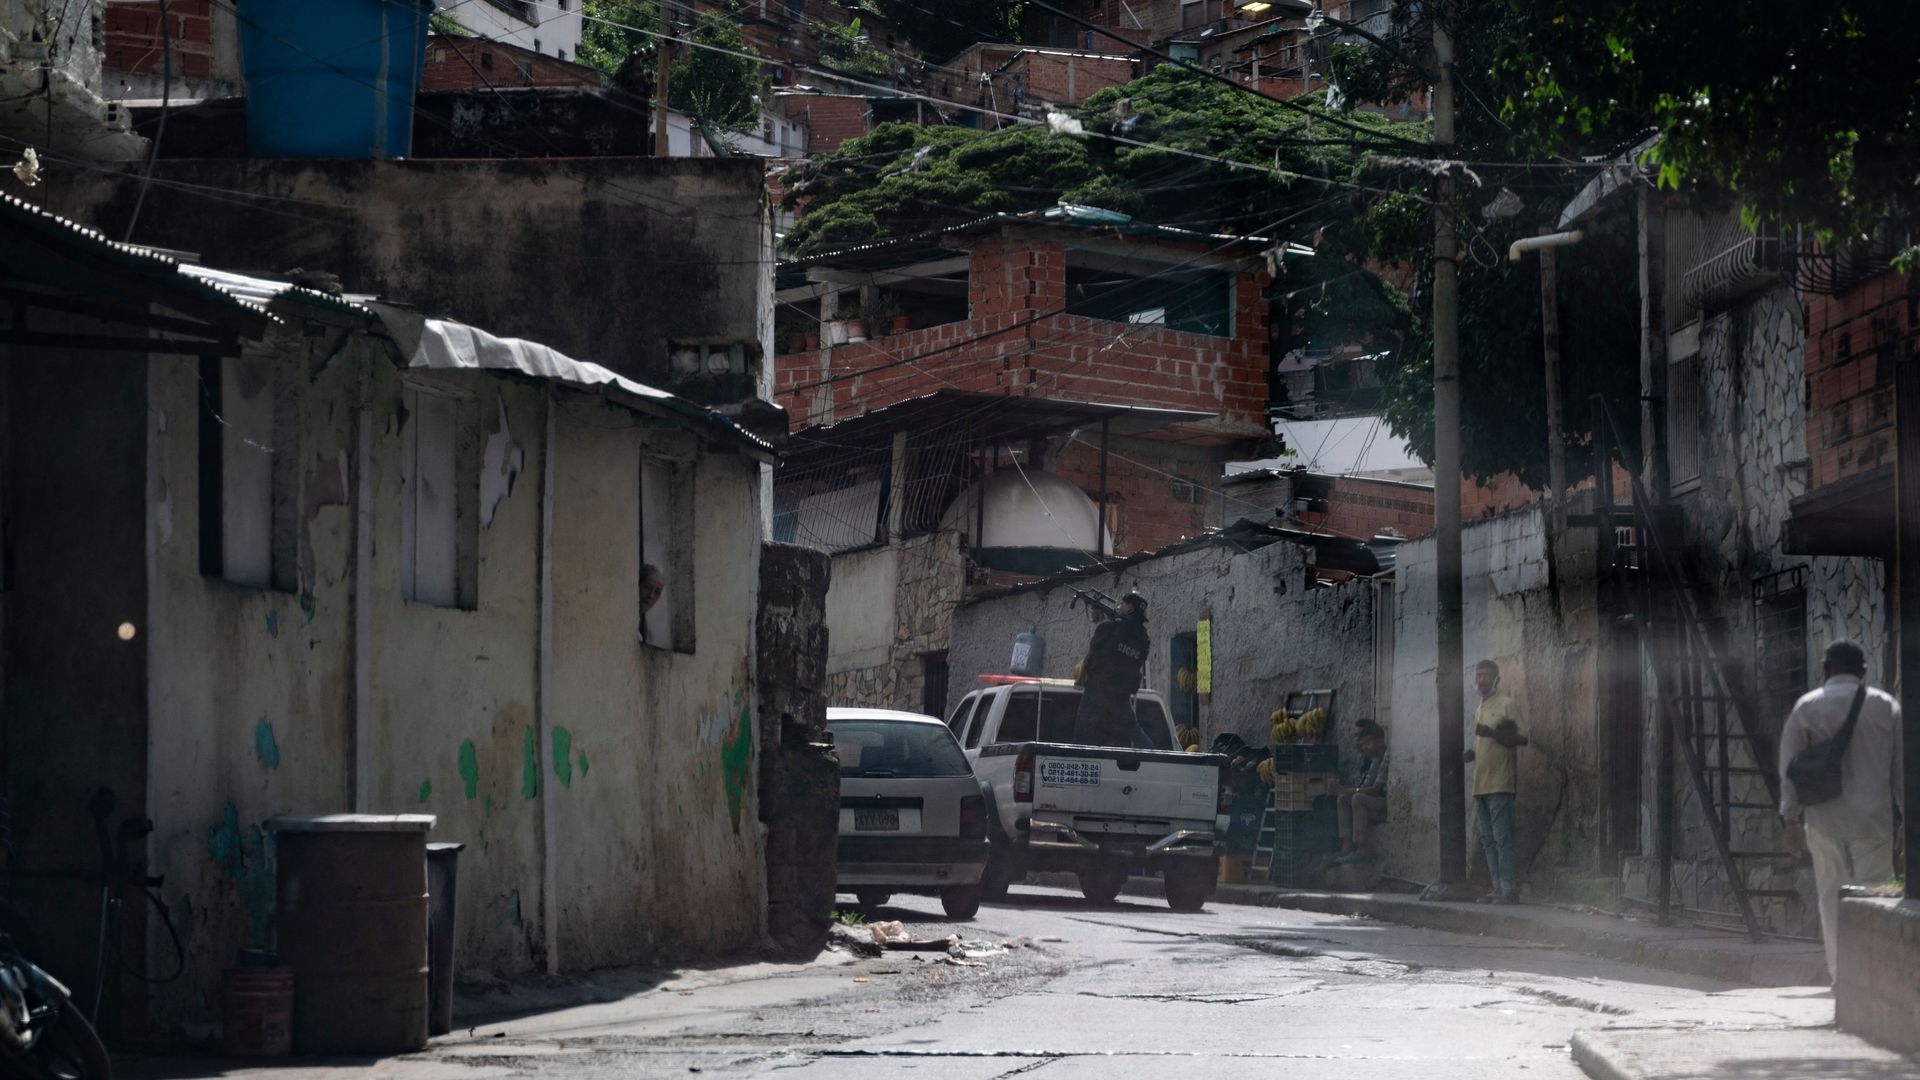 Security forces aim their guns while patrolling the Cota 905 and El Valle neighborhoods of Caracas during clashes with gangs, July 8.